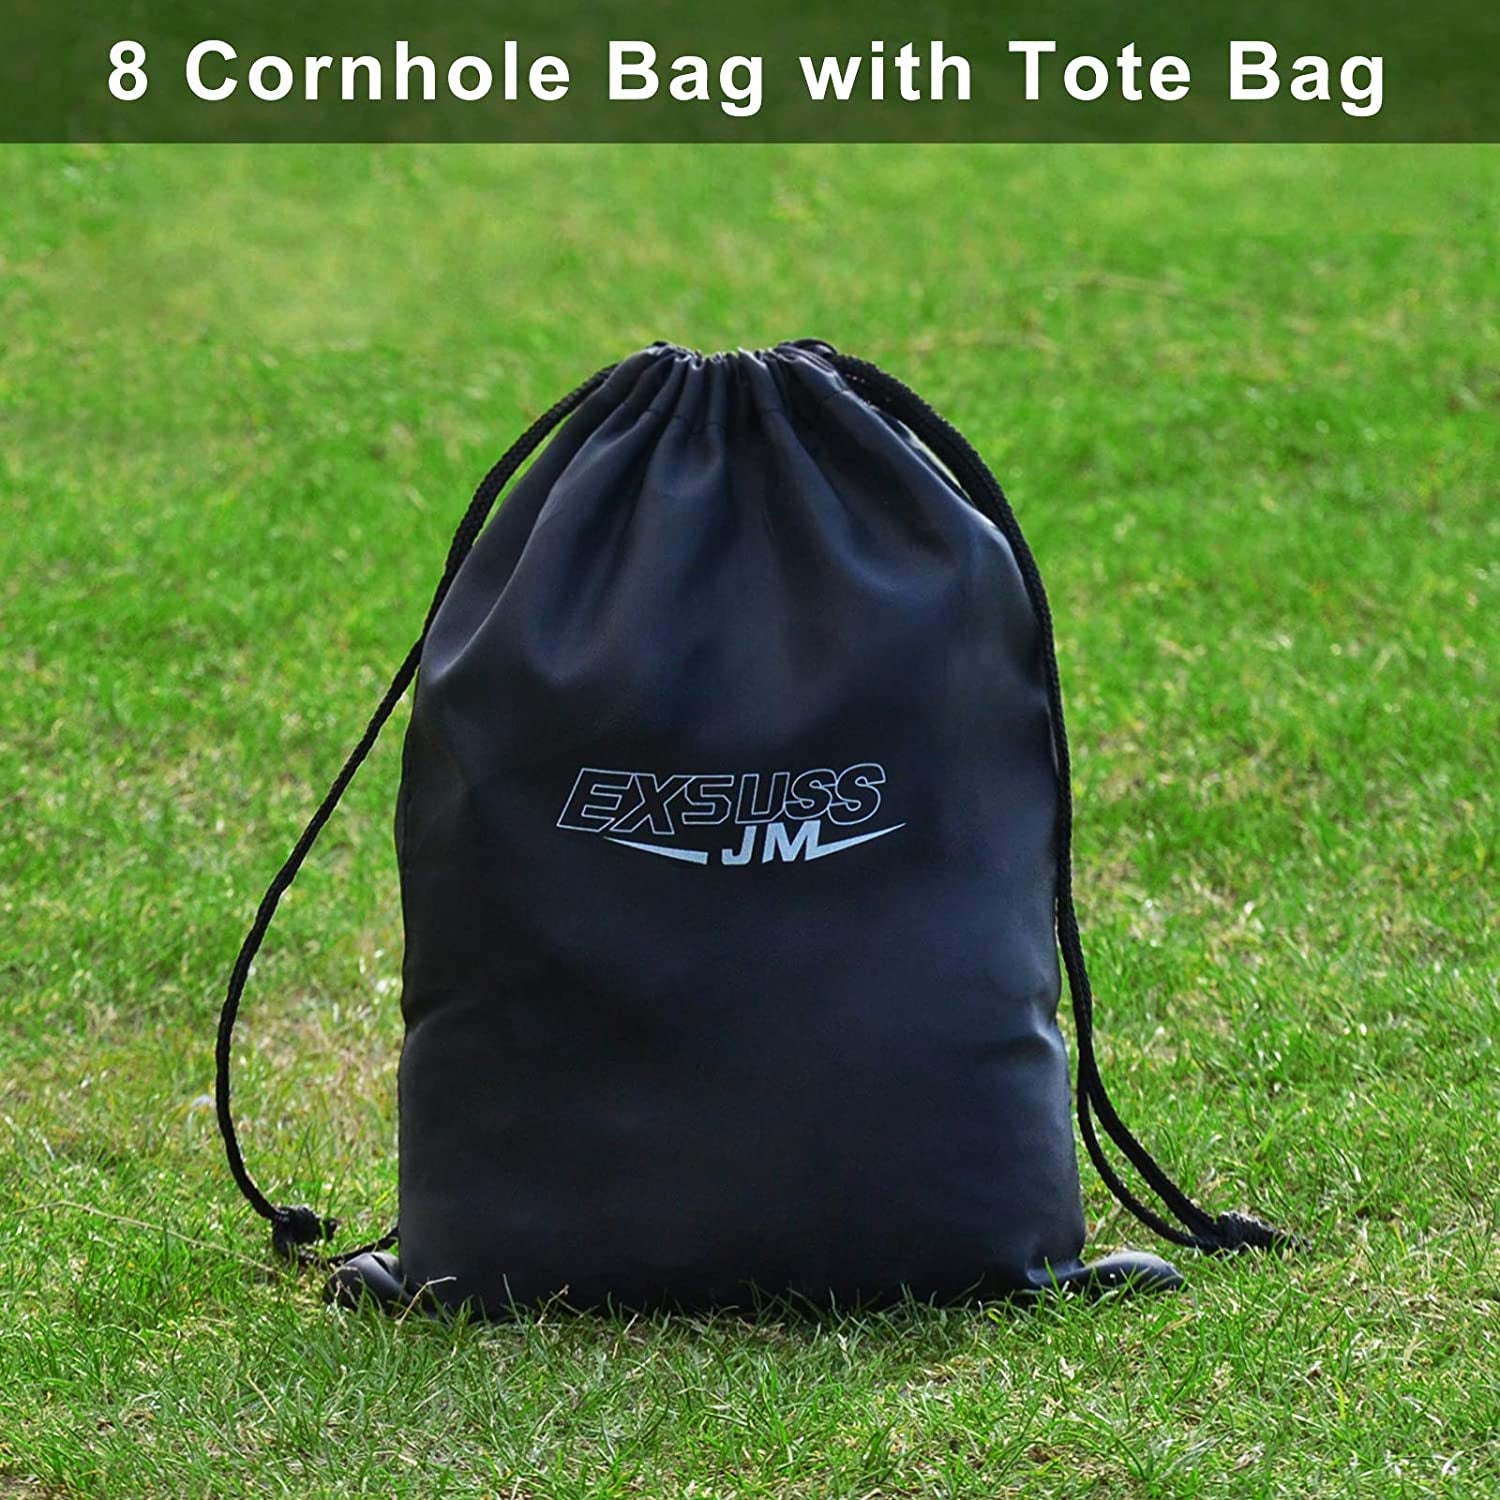 "Ultimate Weatherproof Cornhole Bags - 8 Pro-Grade Bean Bags for the Perfect Tossing Game, Includes Handy Tote Bag"